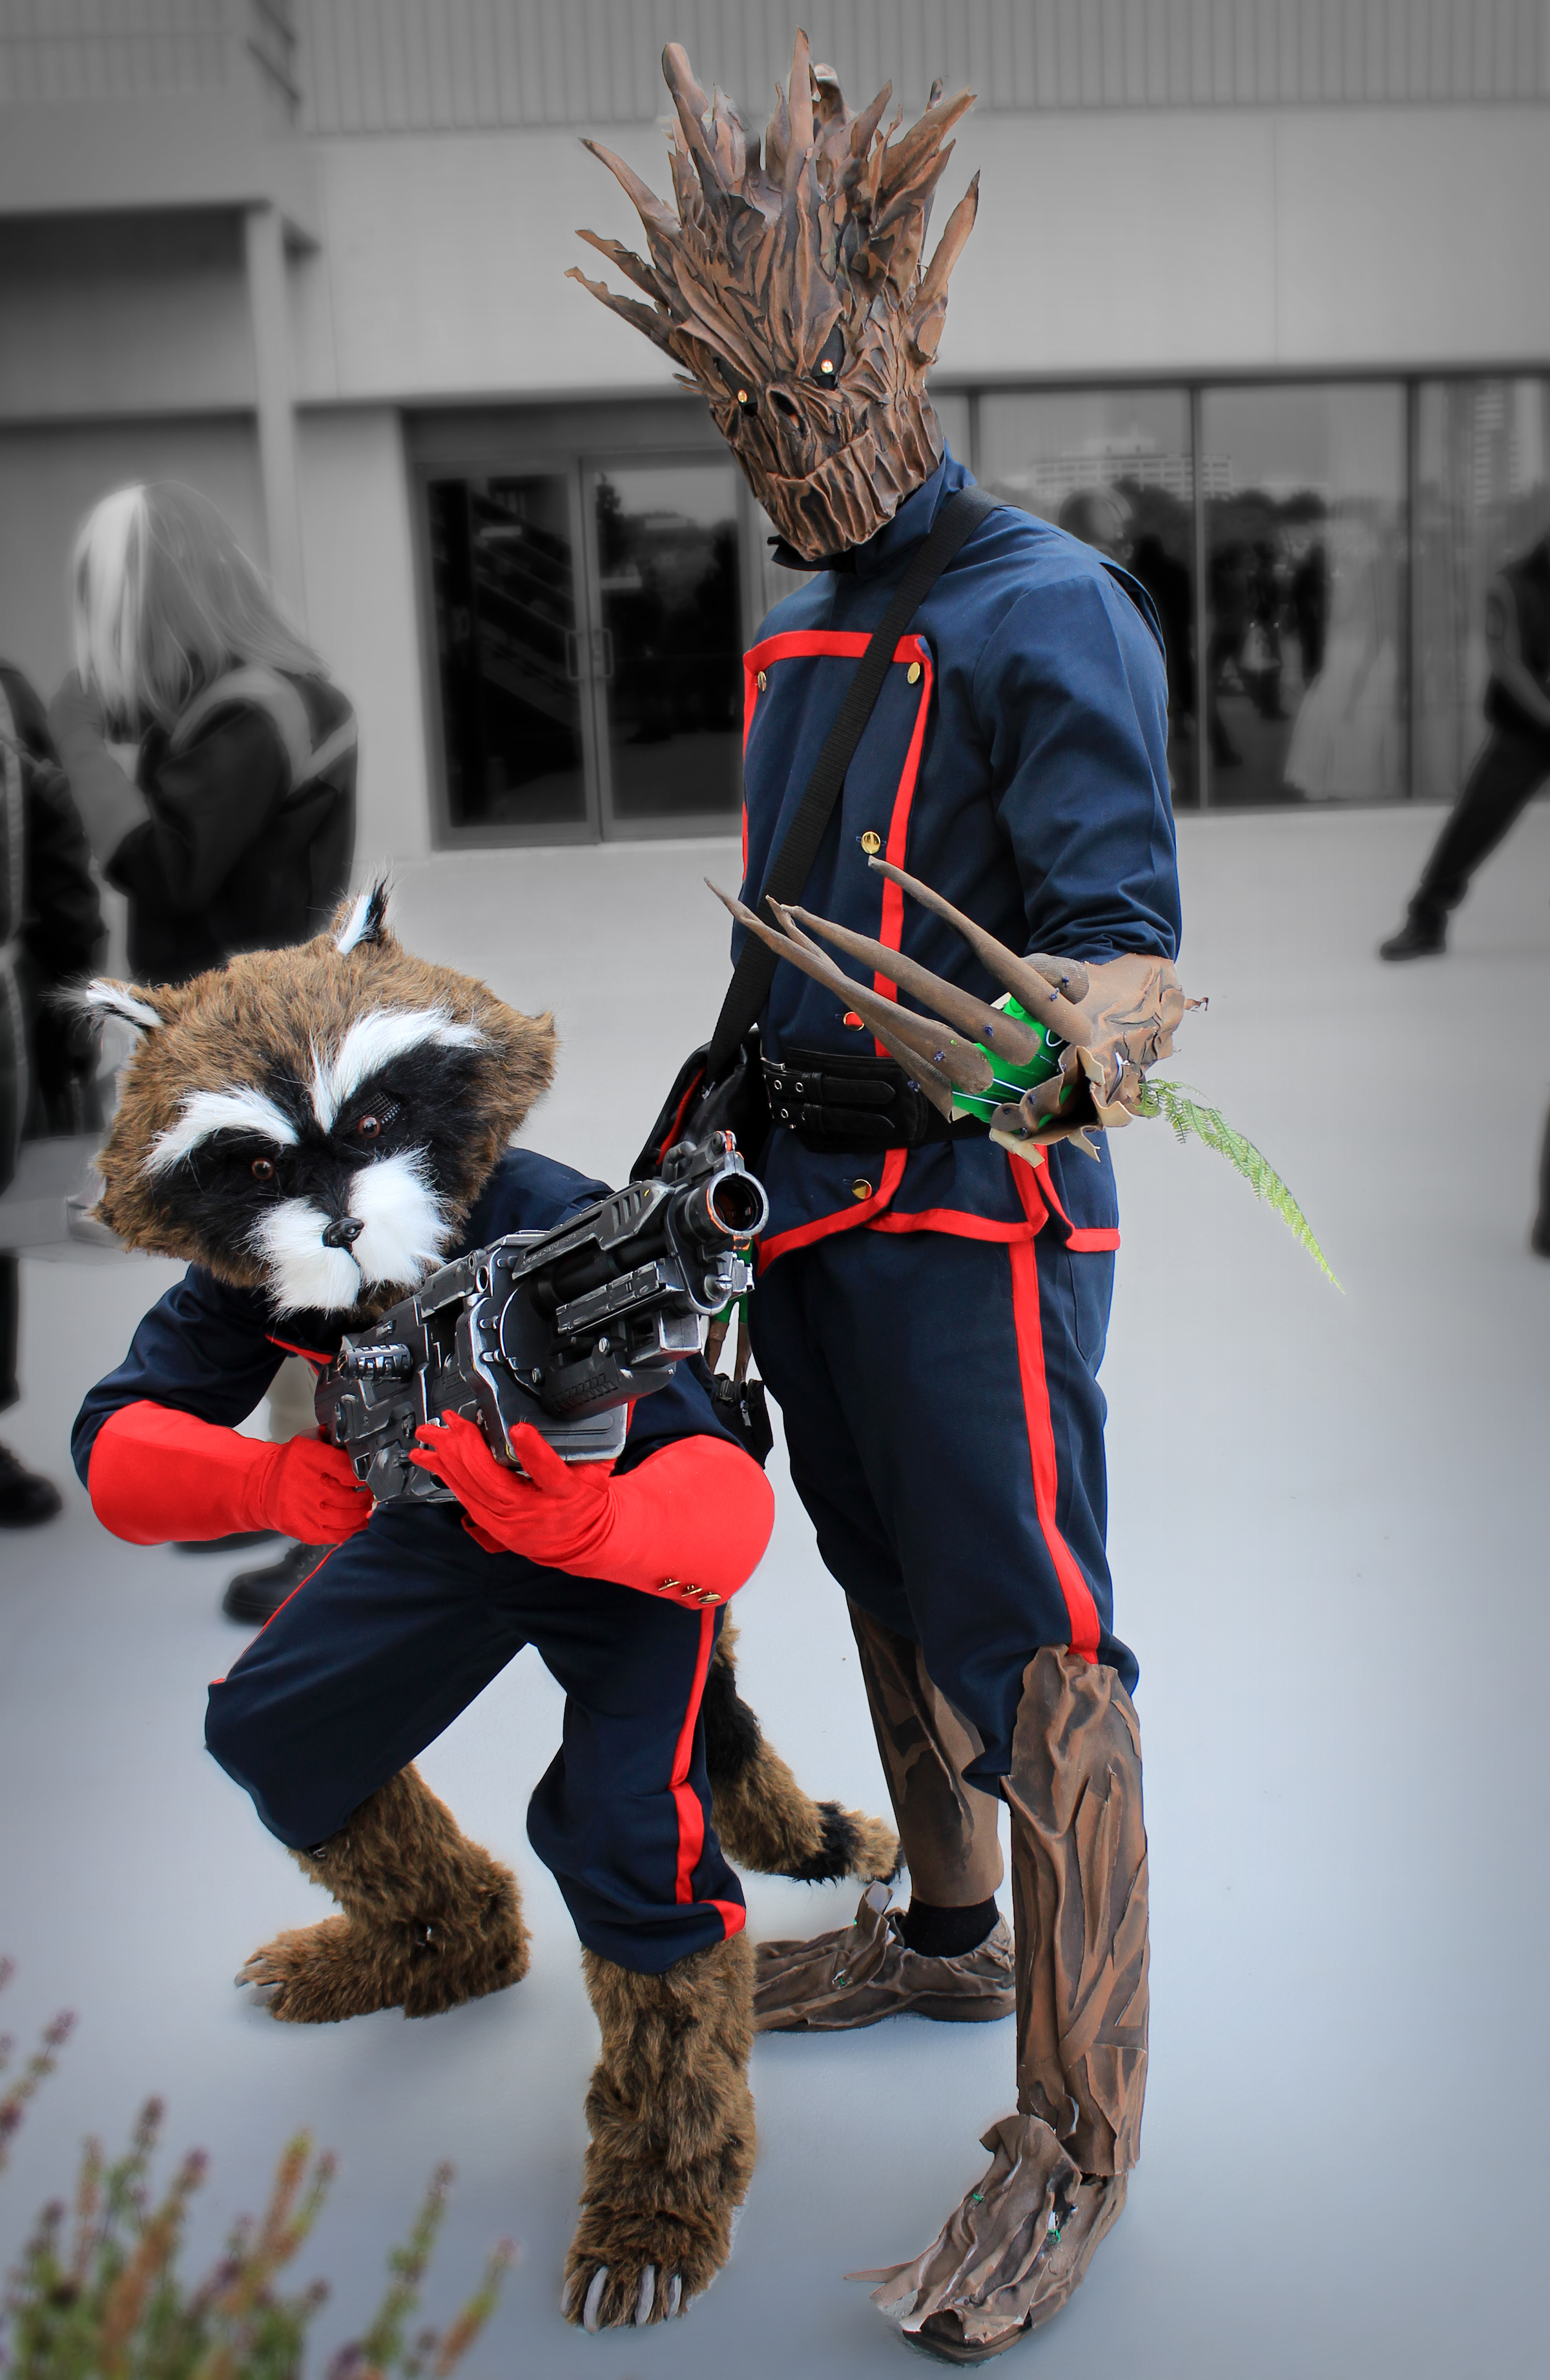 Le cosplay du jour ! - Page 5 Cosplays_Rocket_Raccoon_and_Groot_Dragon_Con_2013